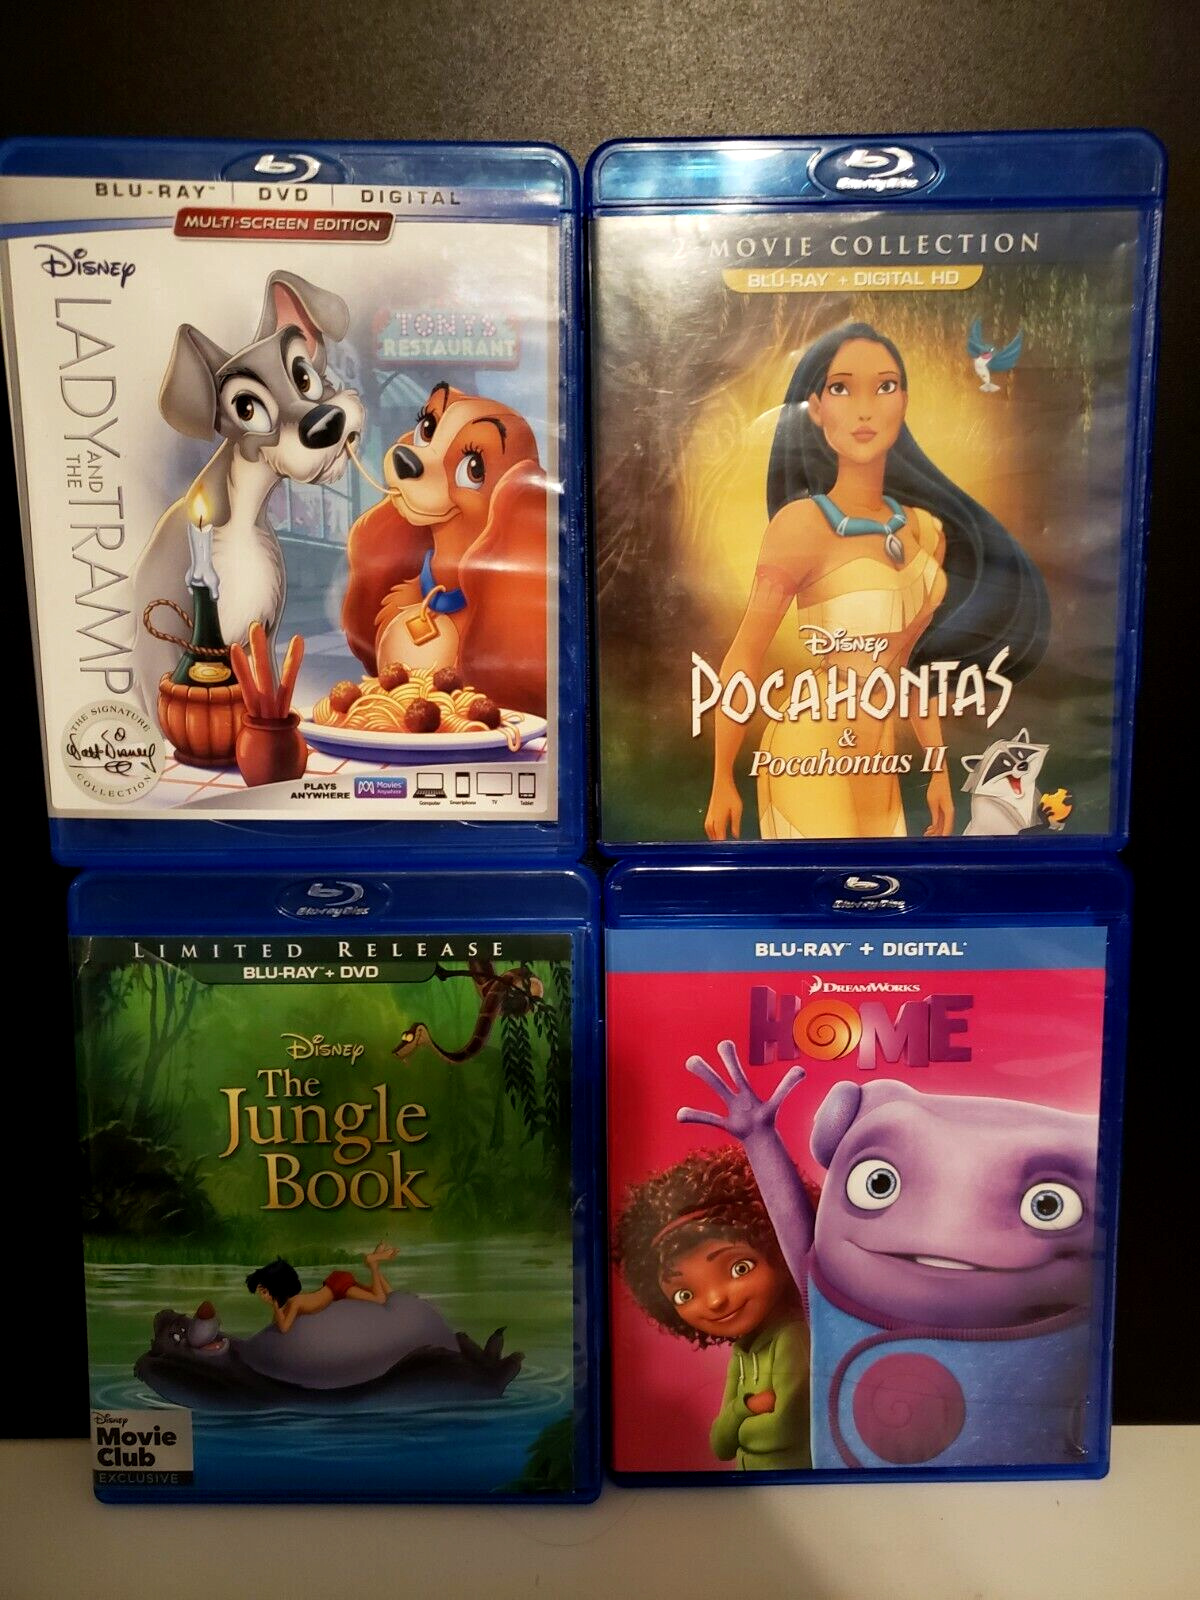 4 kids Disney movies, lady and the tramp, the jungle book, home, pocahontas